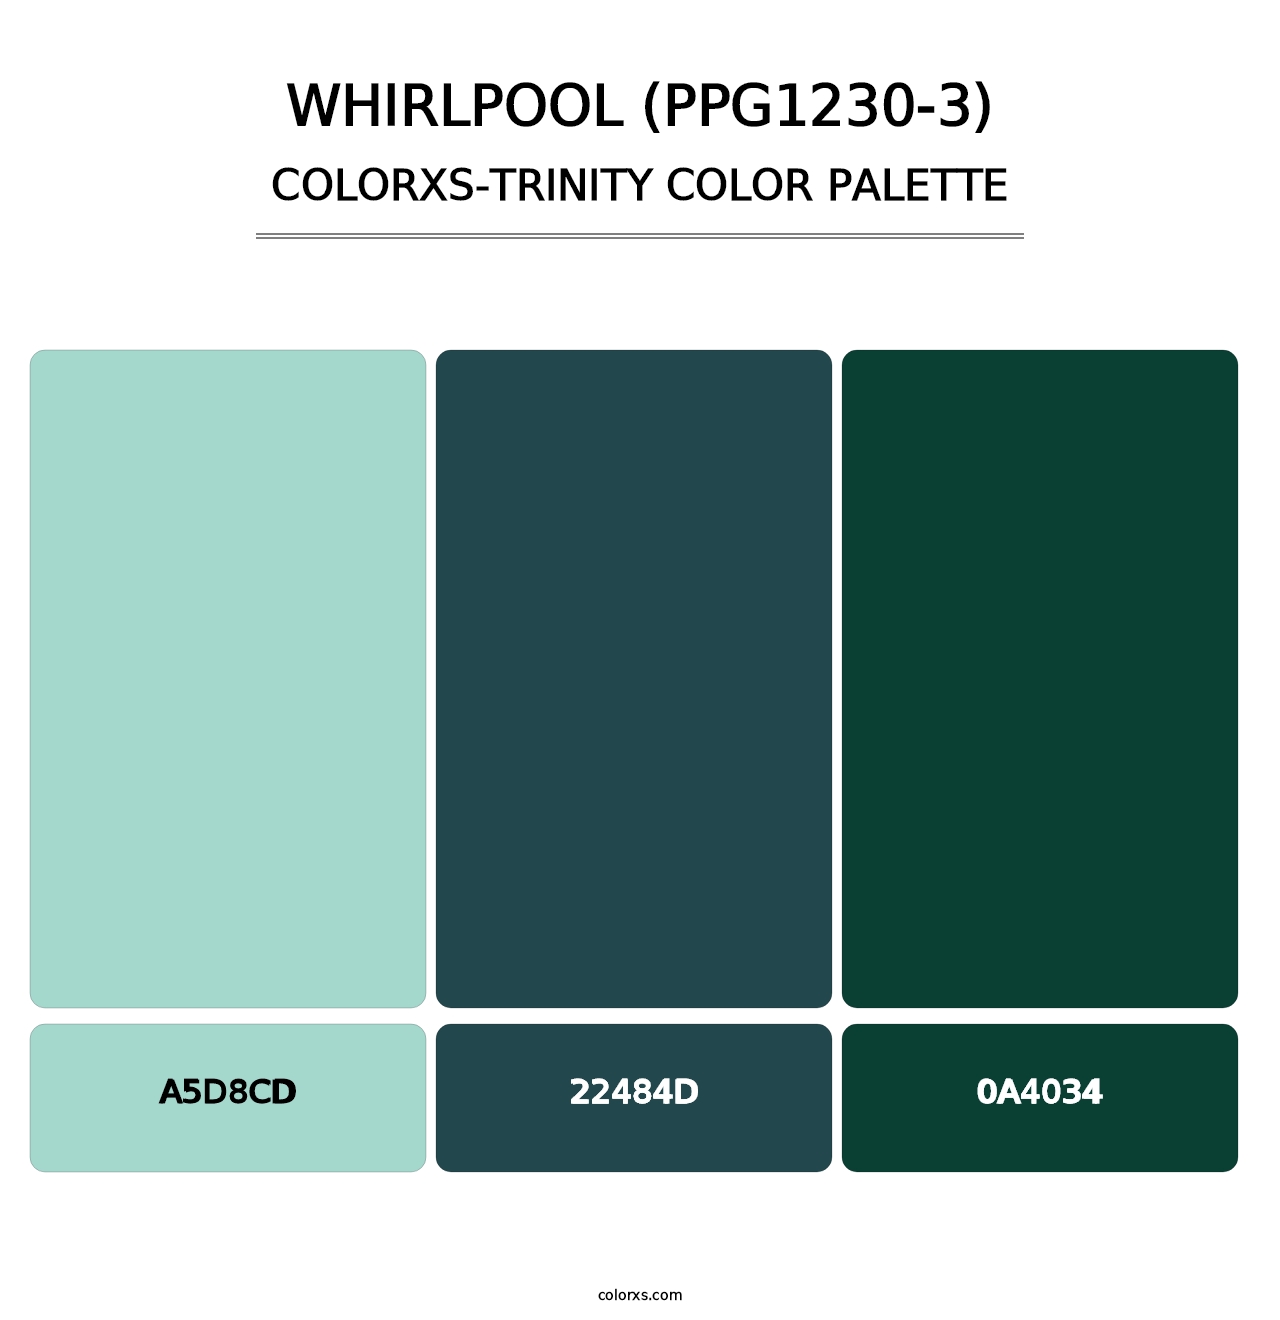 Whirlpool (PPG1230-3) - Colorxs Trinity Palette